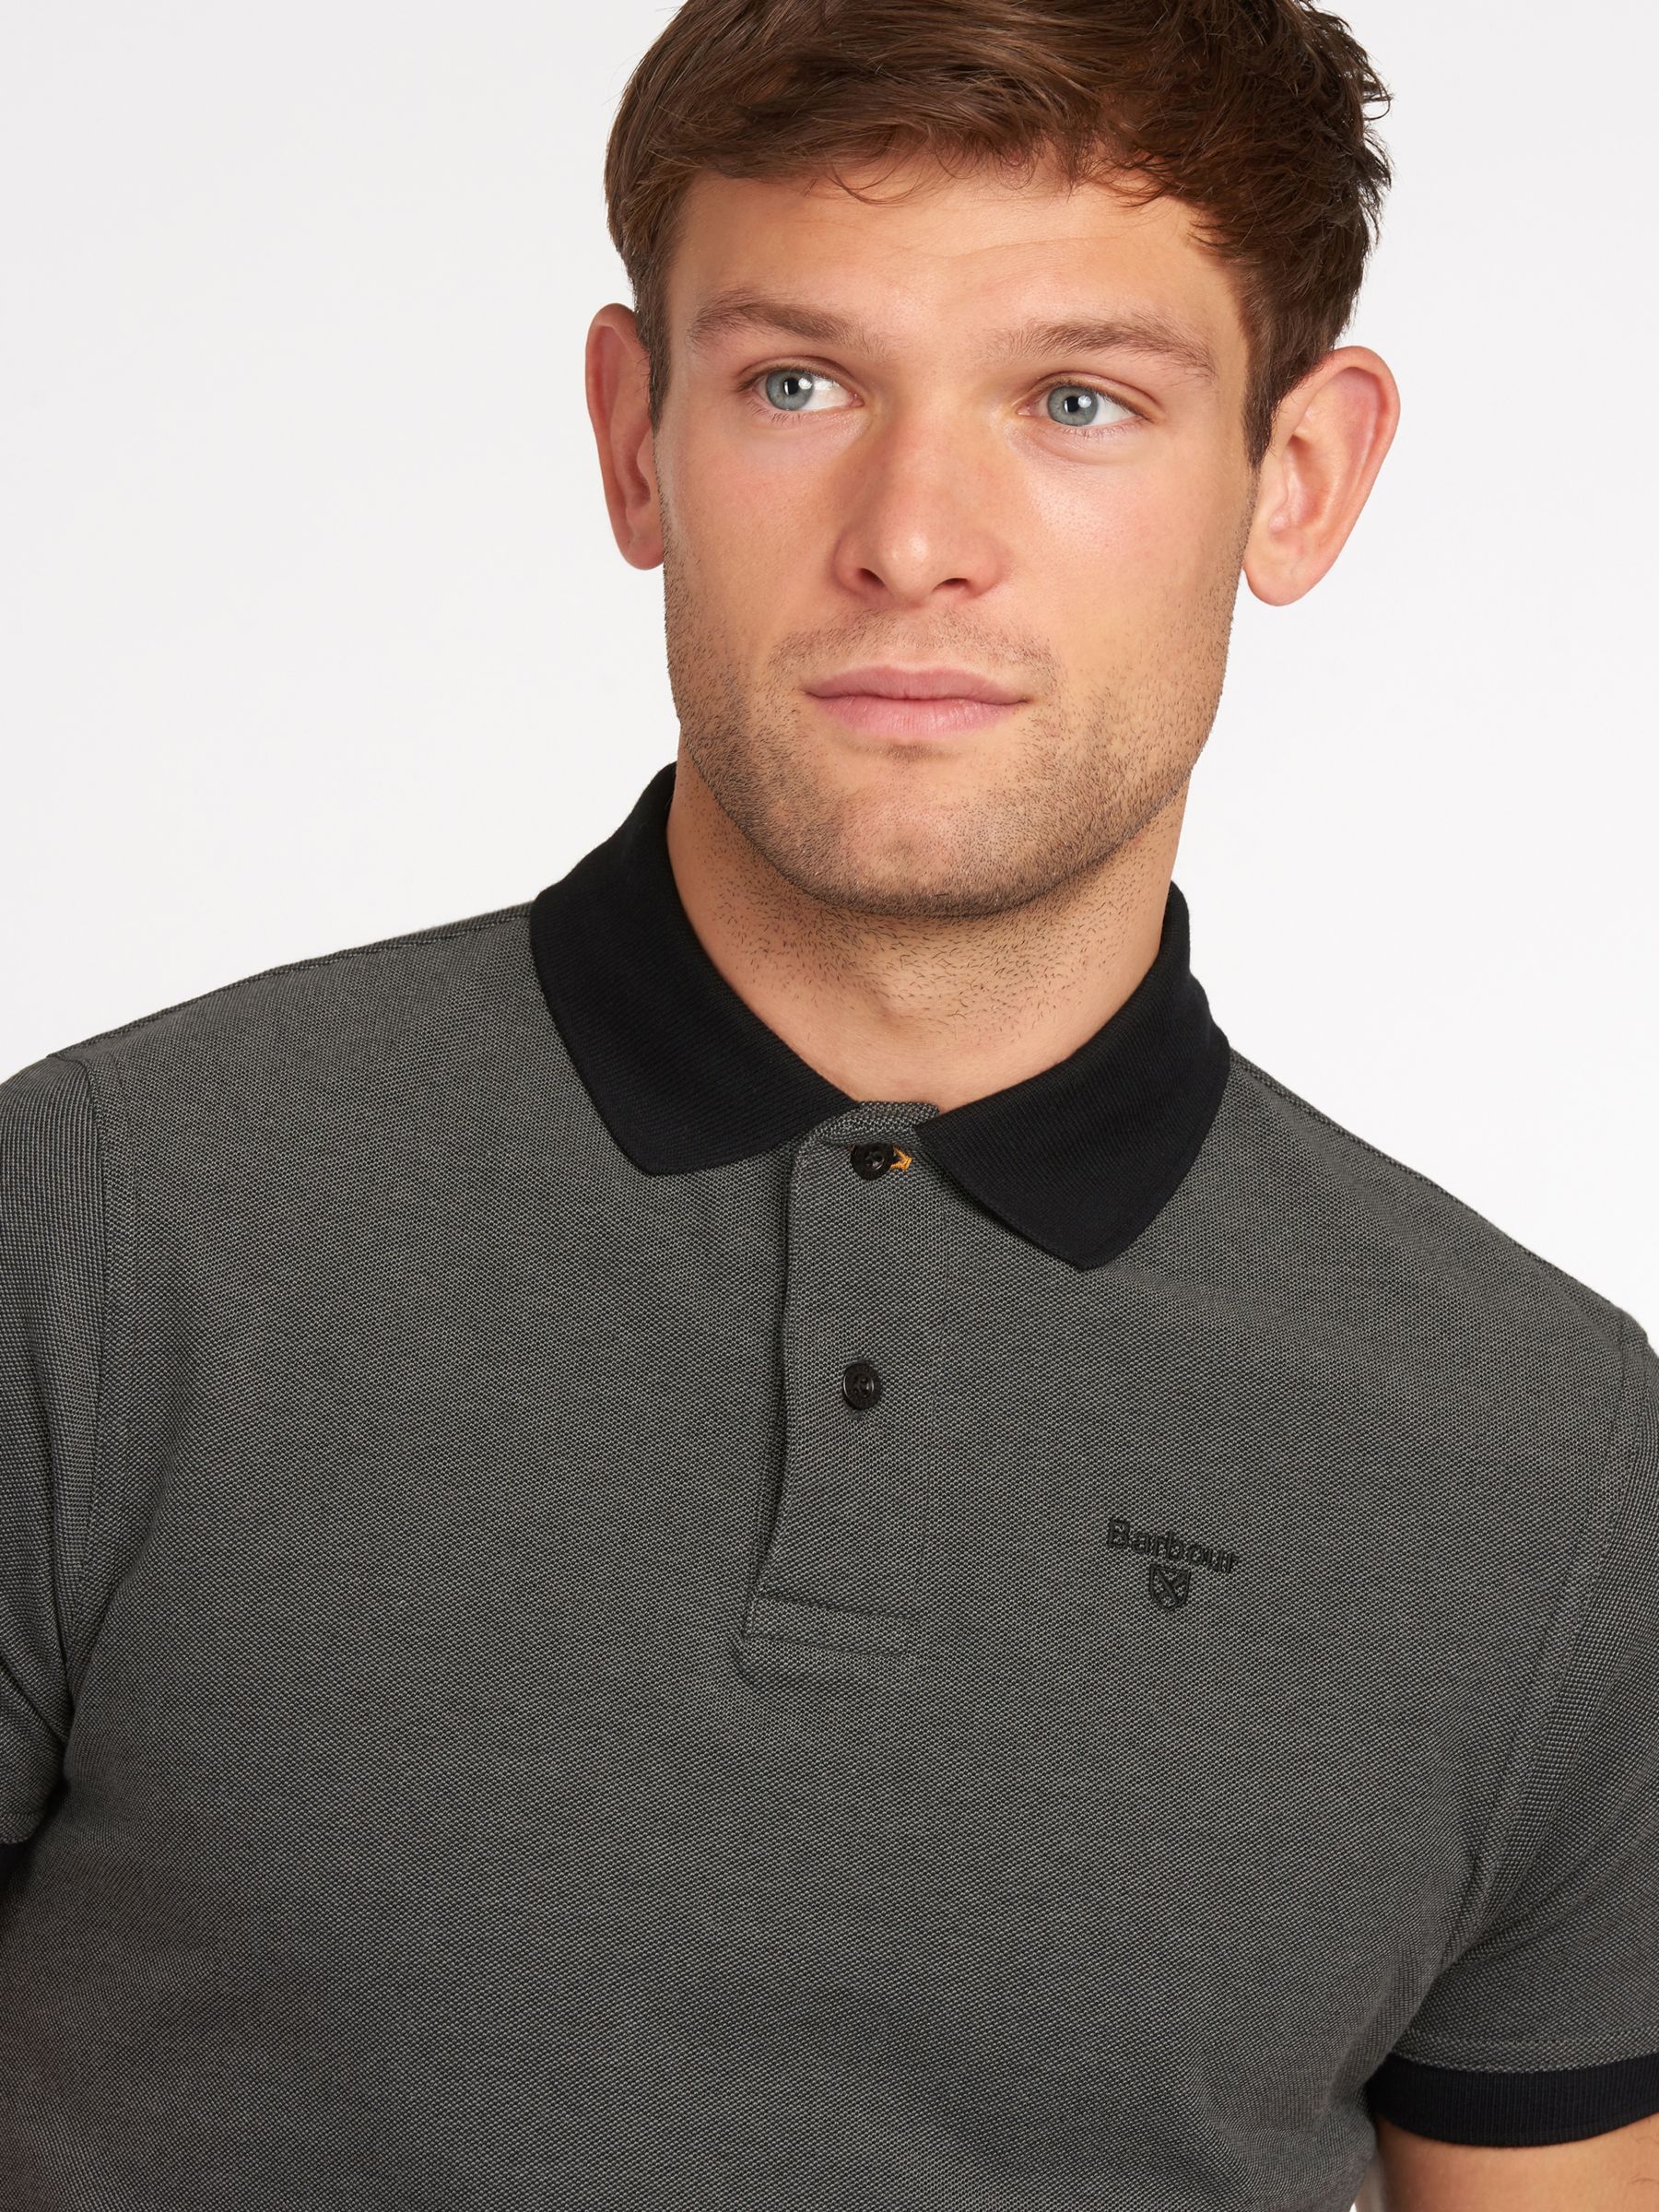 Barbour Essential Sports Mix Polo Shirt, Black at John Lewis & Partners